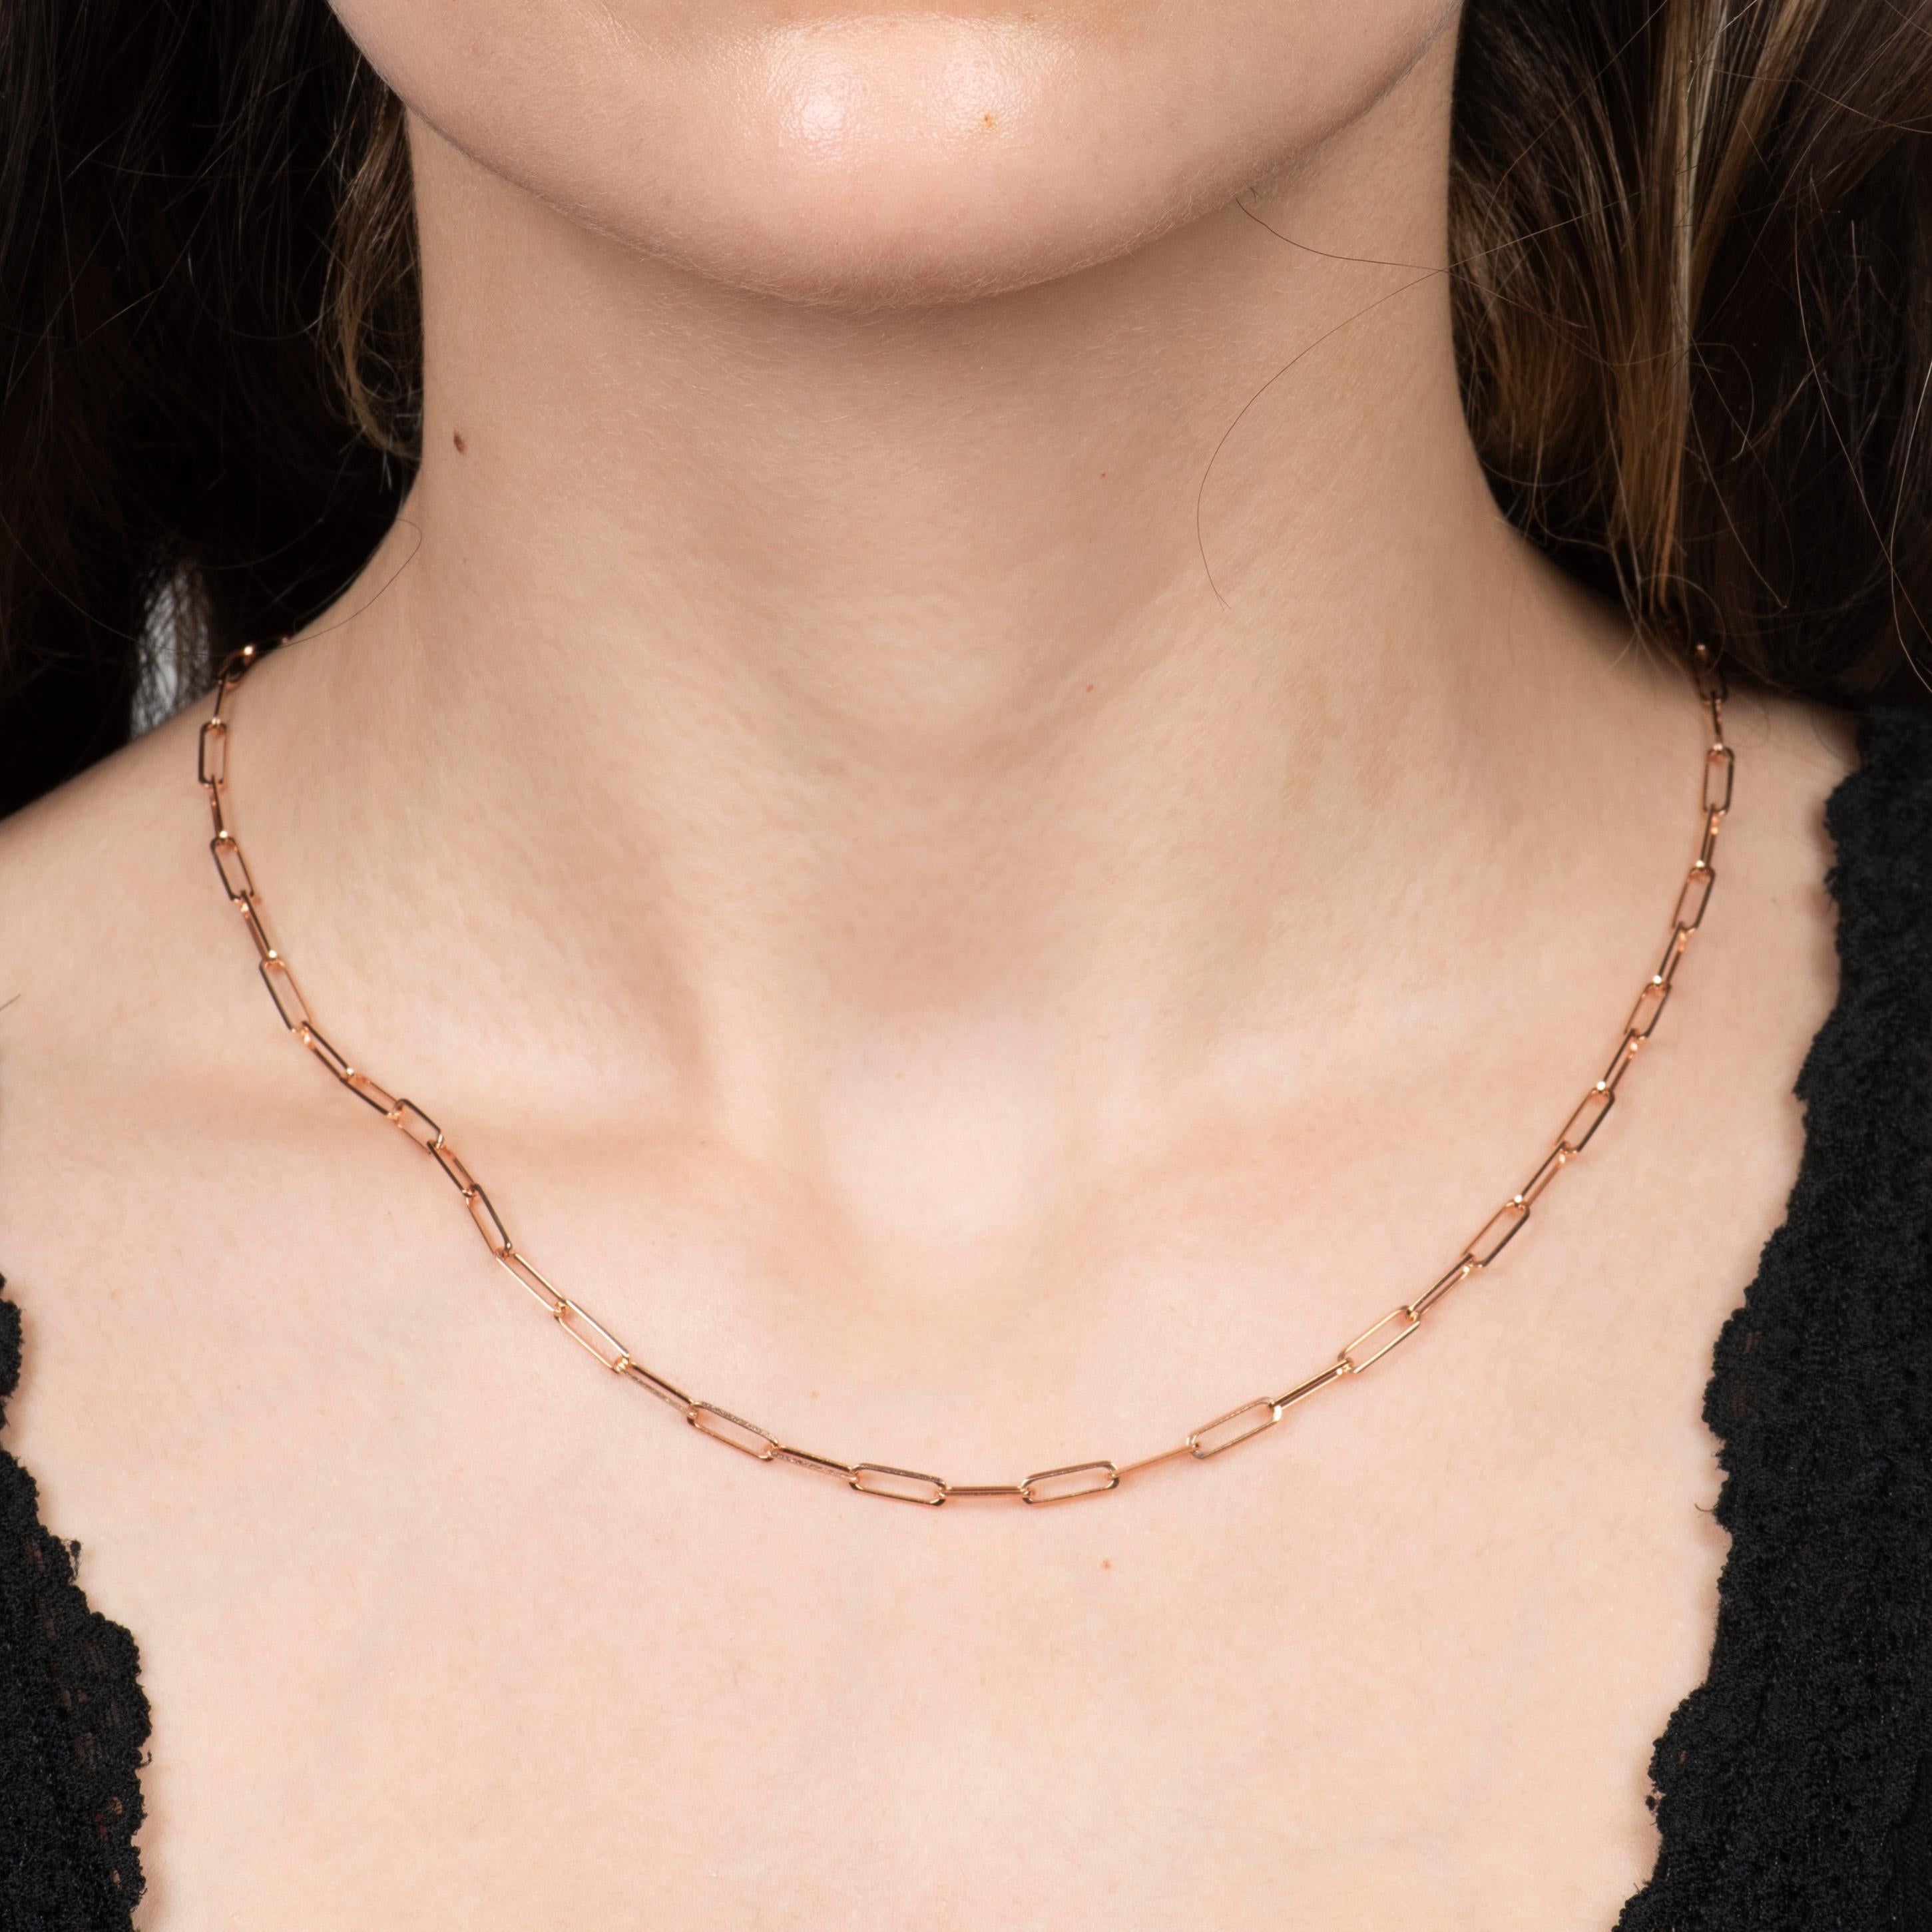 This simple necklace is a 14kt rose gold, 18 inch paperclip chain necklace. It is the perfect necklace for layering!